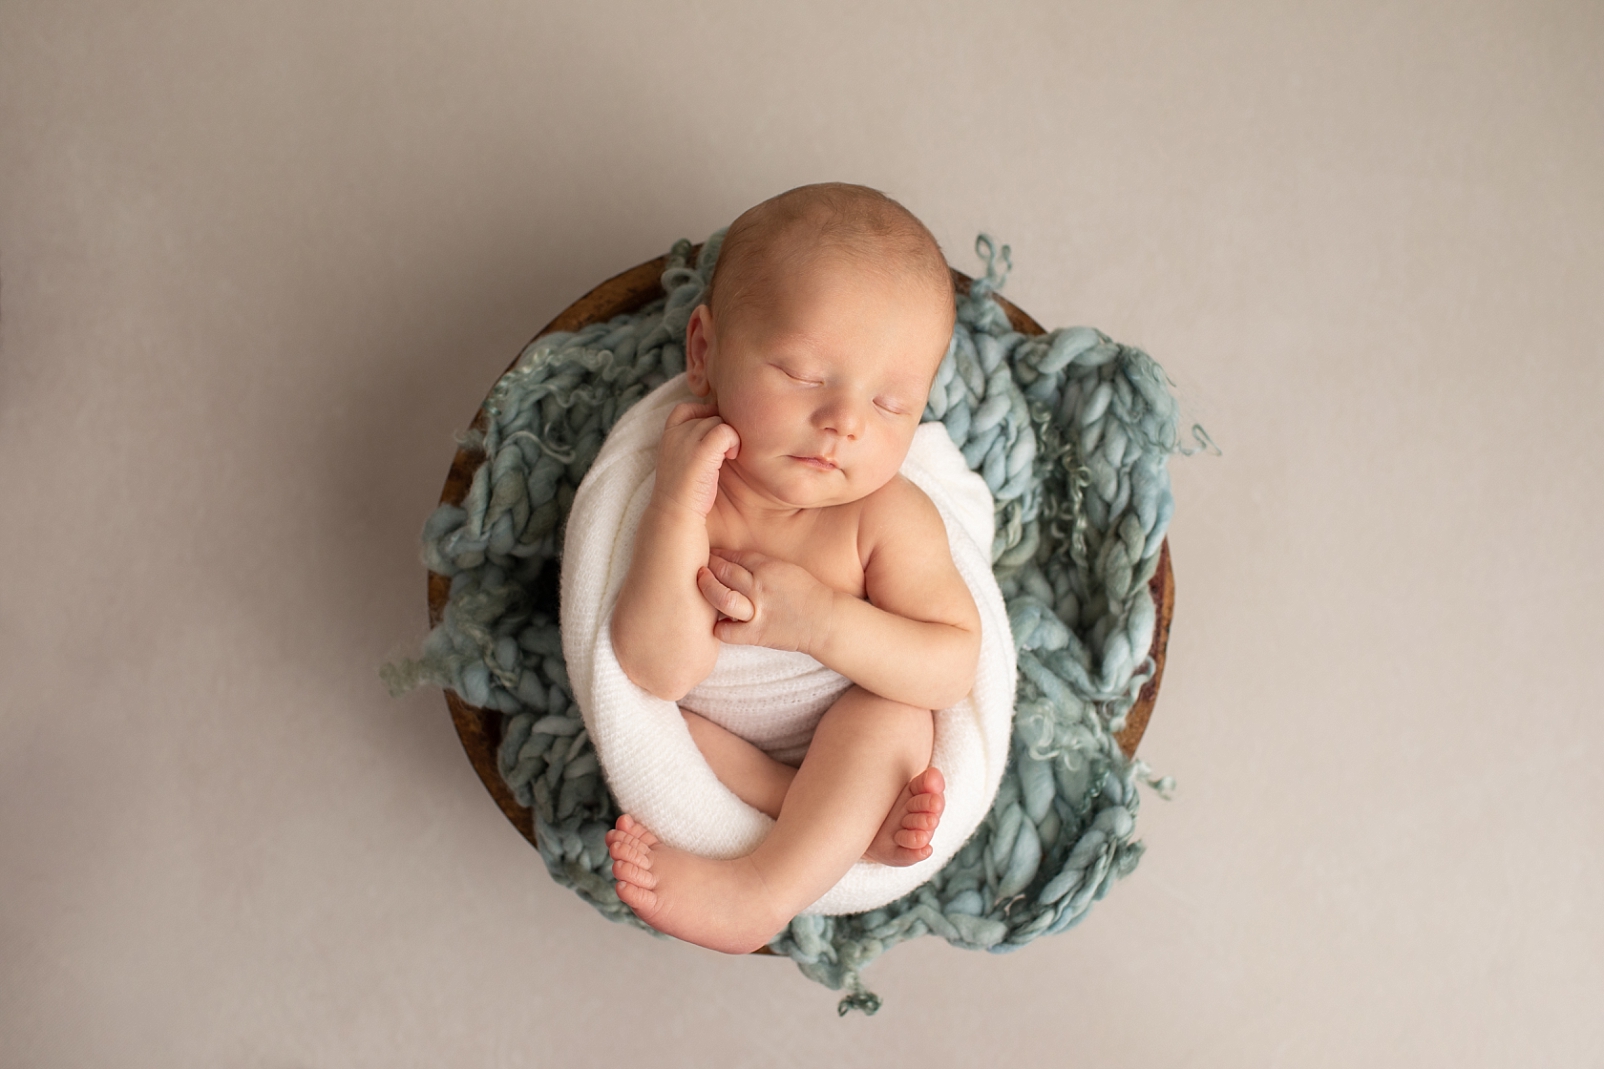 newborn boy wrapped in a white fabric in a brown wooden bowl